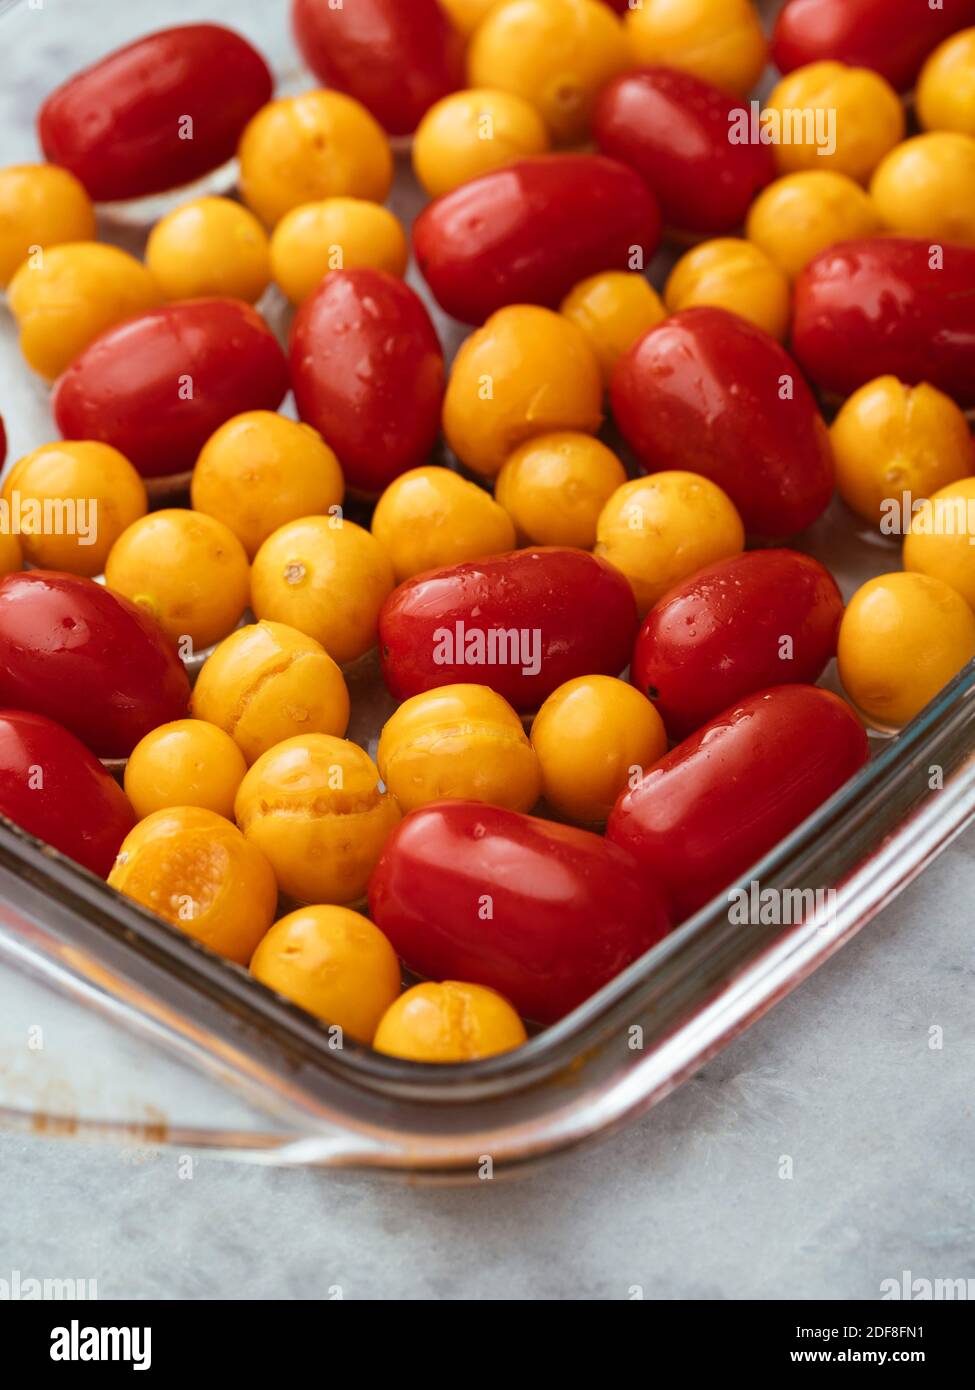 Cherry tomatoes and physalis in a baking dish before behing roasted. Stock Photo